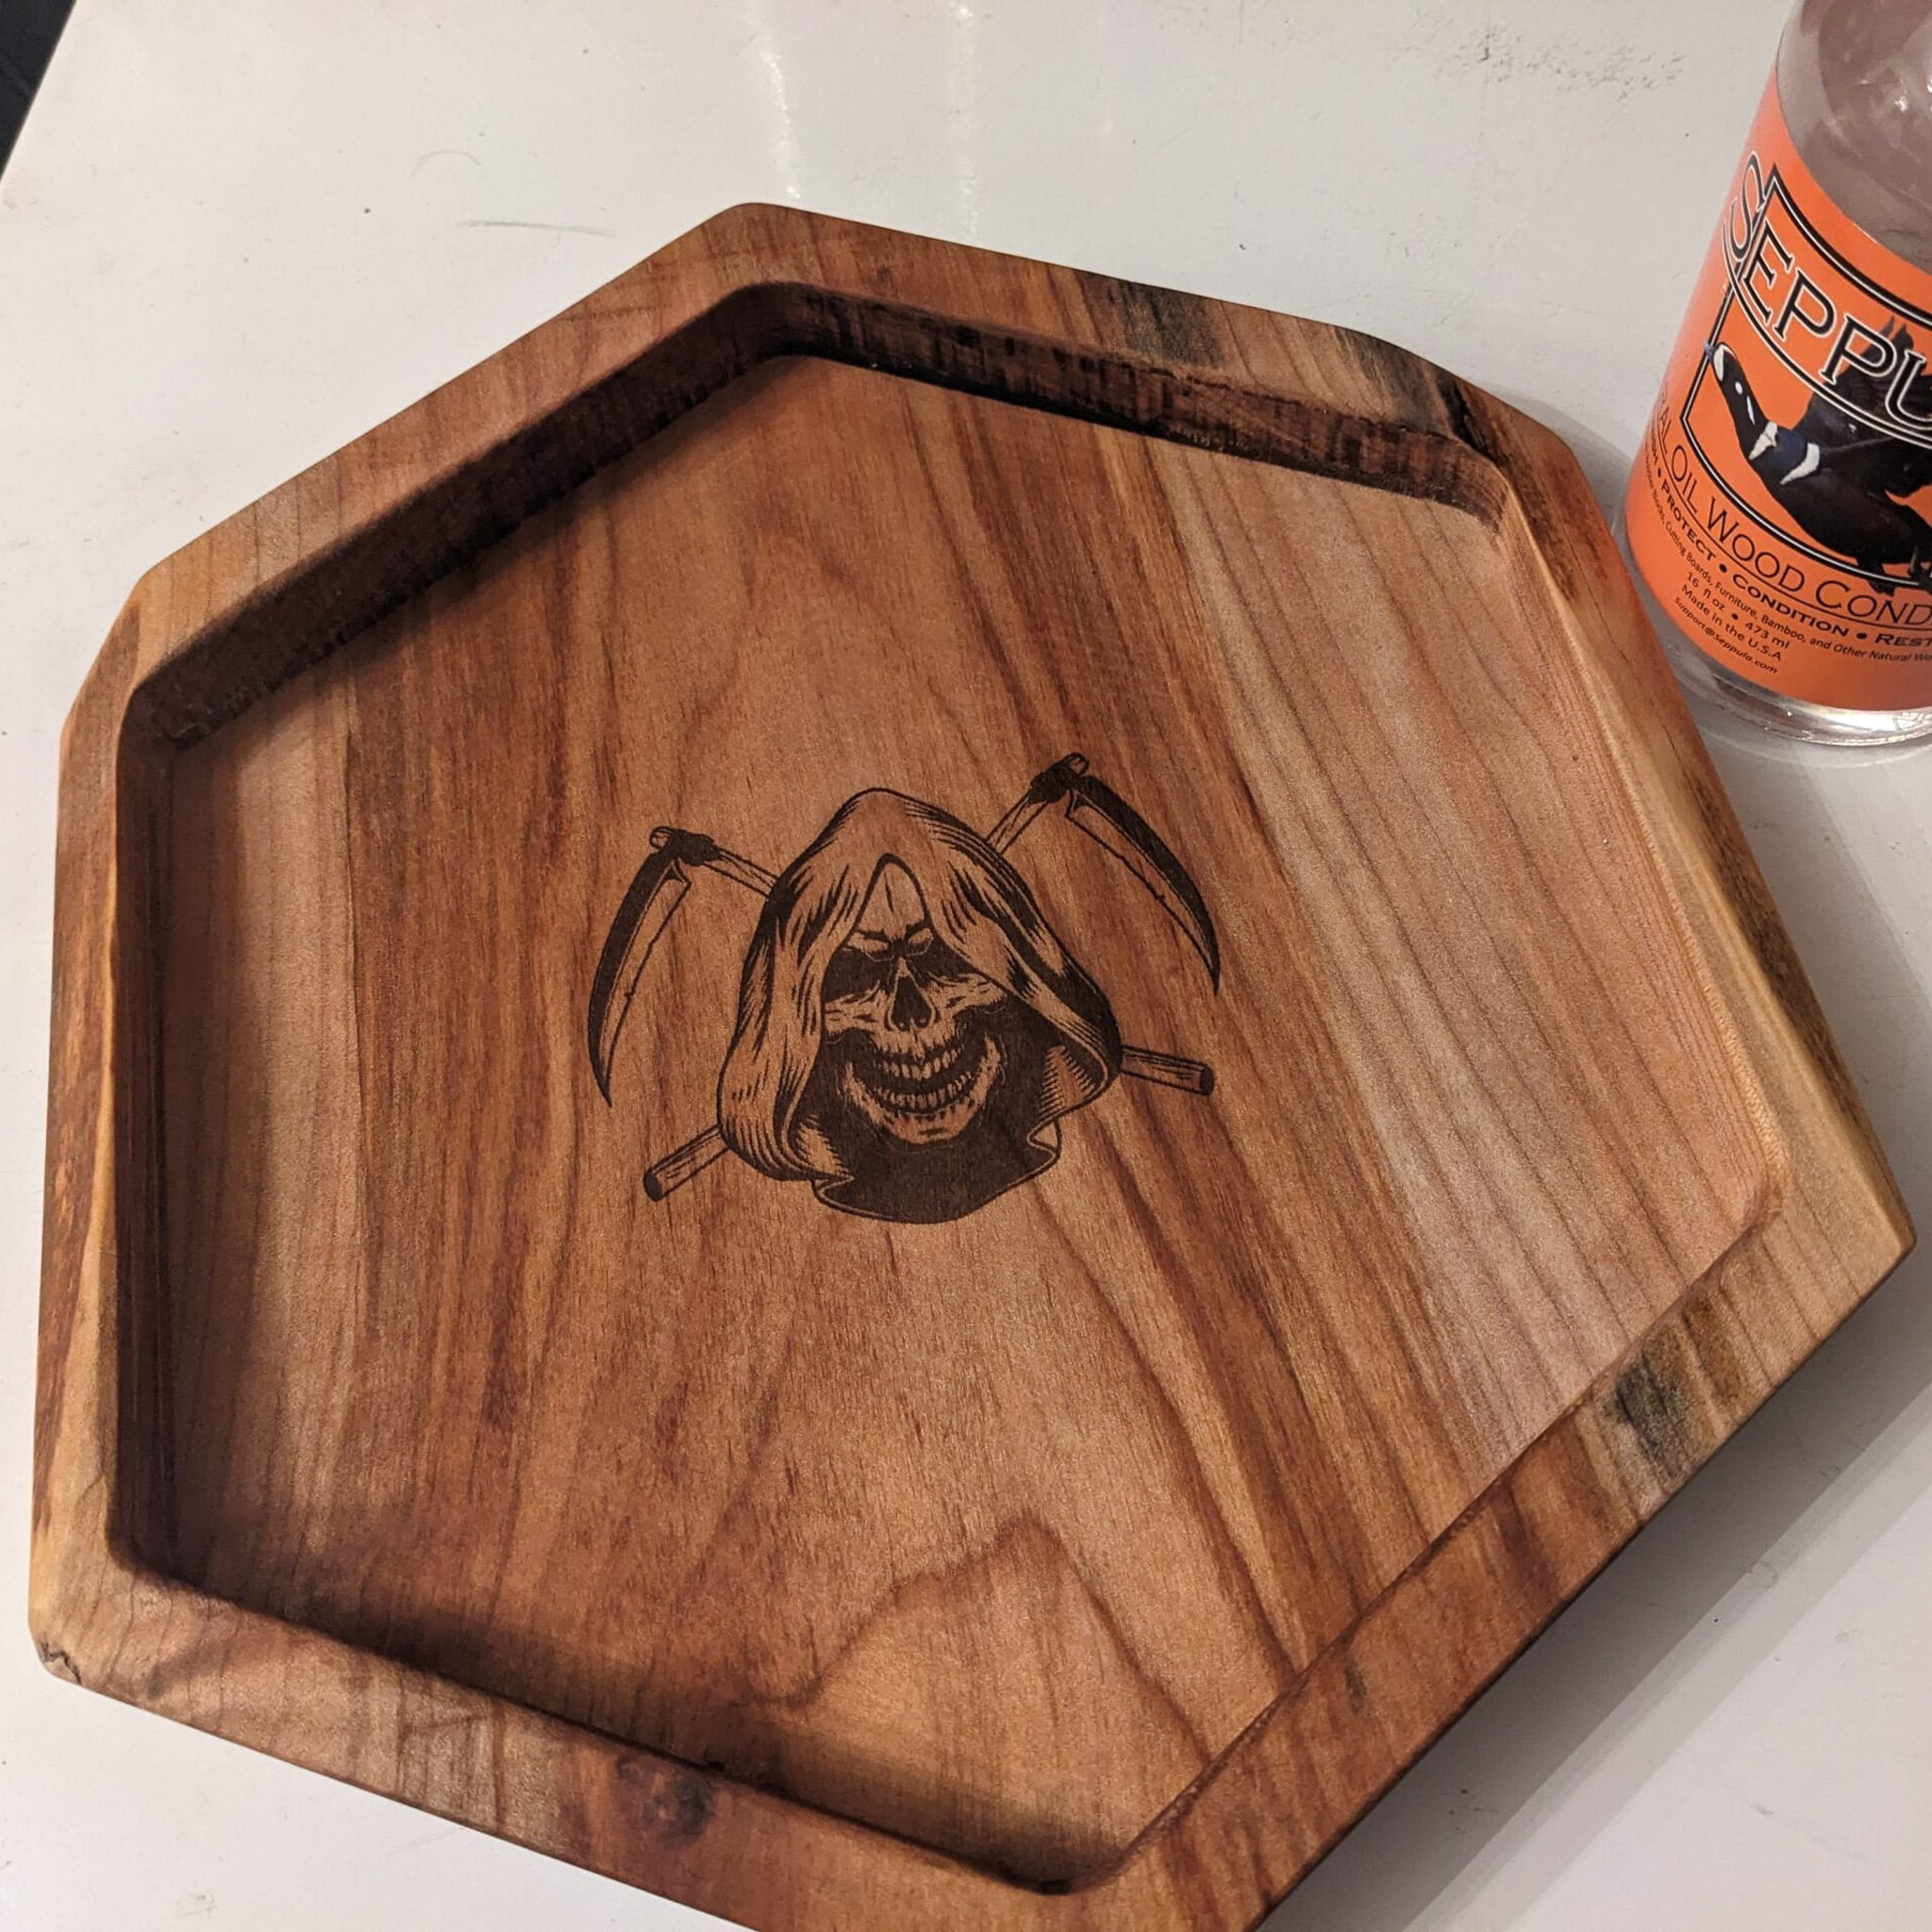 Custom CNC laser etched wood sign DND dice tray gift by Galactic Sign Co.